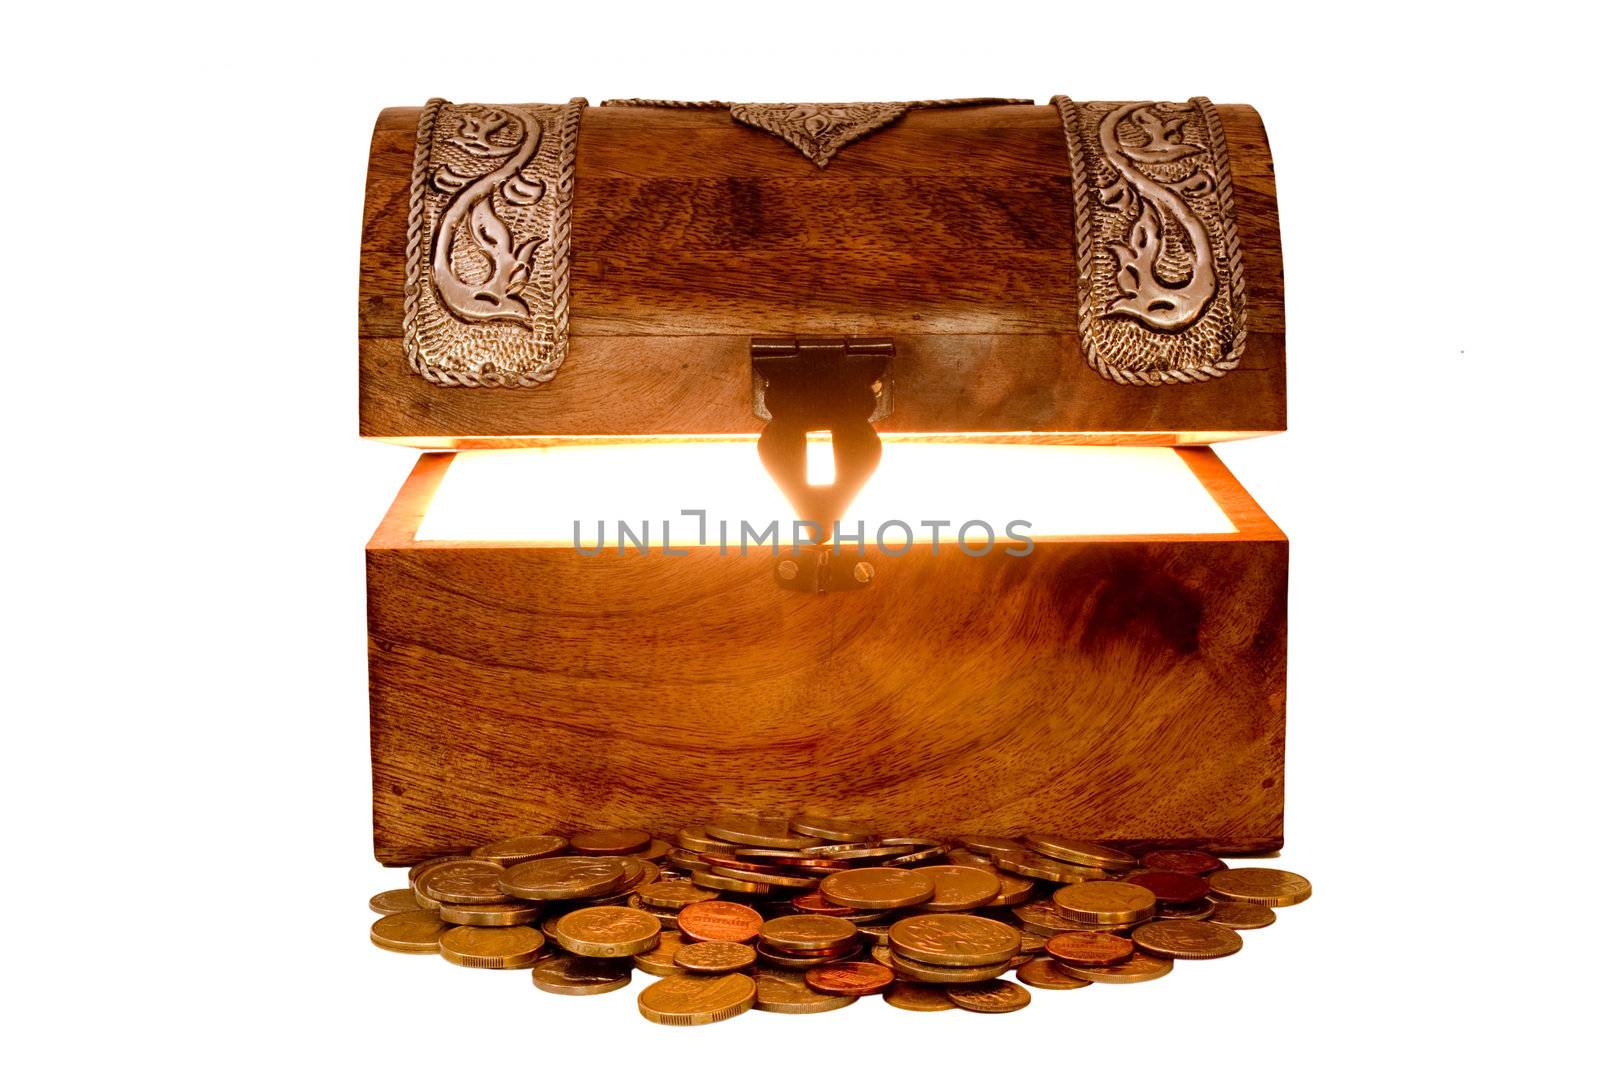 Glowing treasure chest with lid lifted and with a pile of coins in front of it, isolated on white. Coins are a mixture of different currencies, including USA, UK, Australia, New Zealand, Hong Kong, Singapore, but none really stand out.